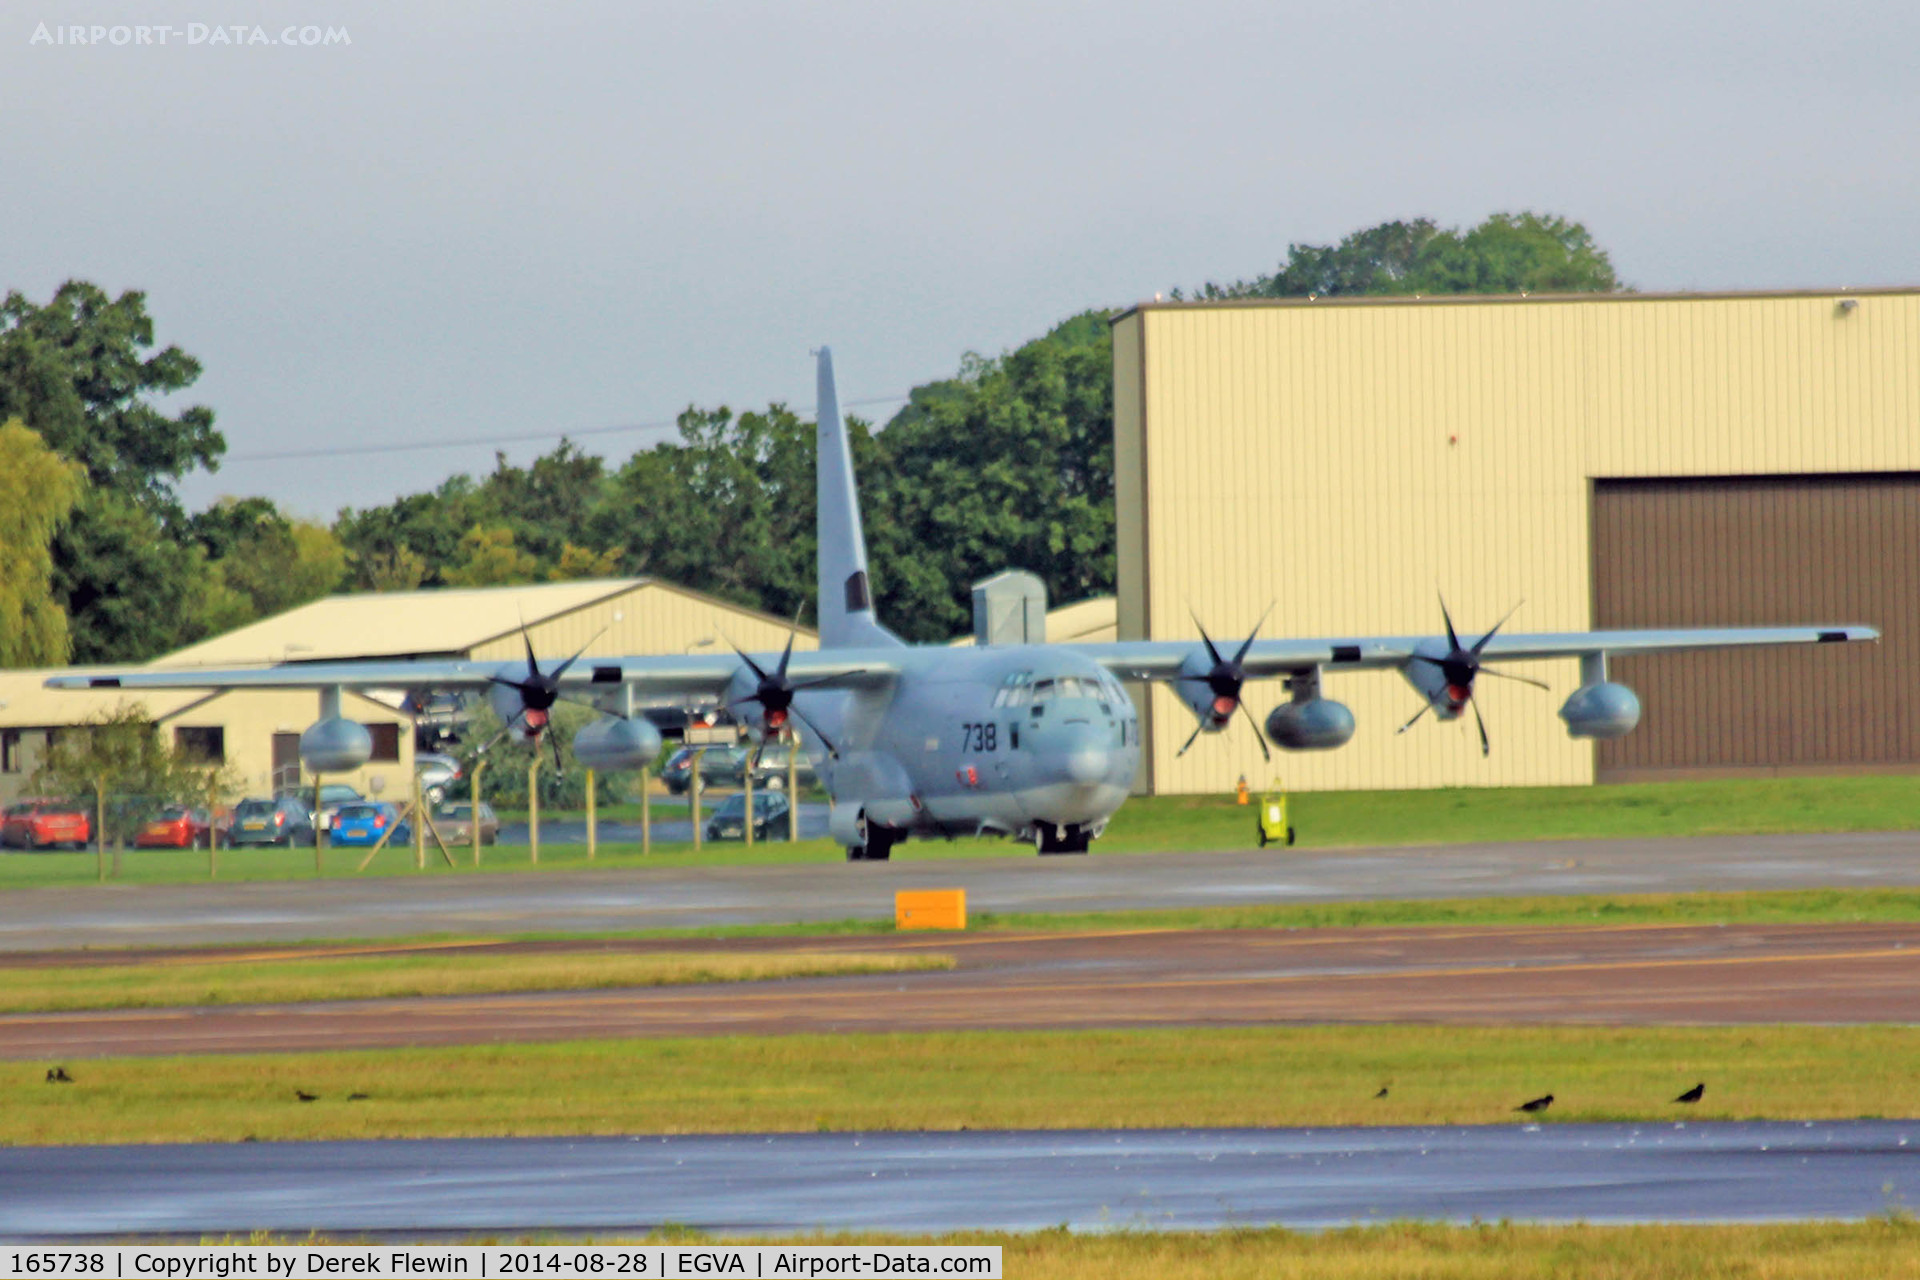 165738, 2001 Lockheed Martin KC-130J Hercules C/N 382-5506, MCAS Cherry Point NC based, United States Marine Corps, KC-130J, call-sign Otis 80, seen at RAF Fairford after refuelling 4x Ospreys.